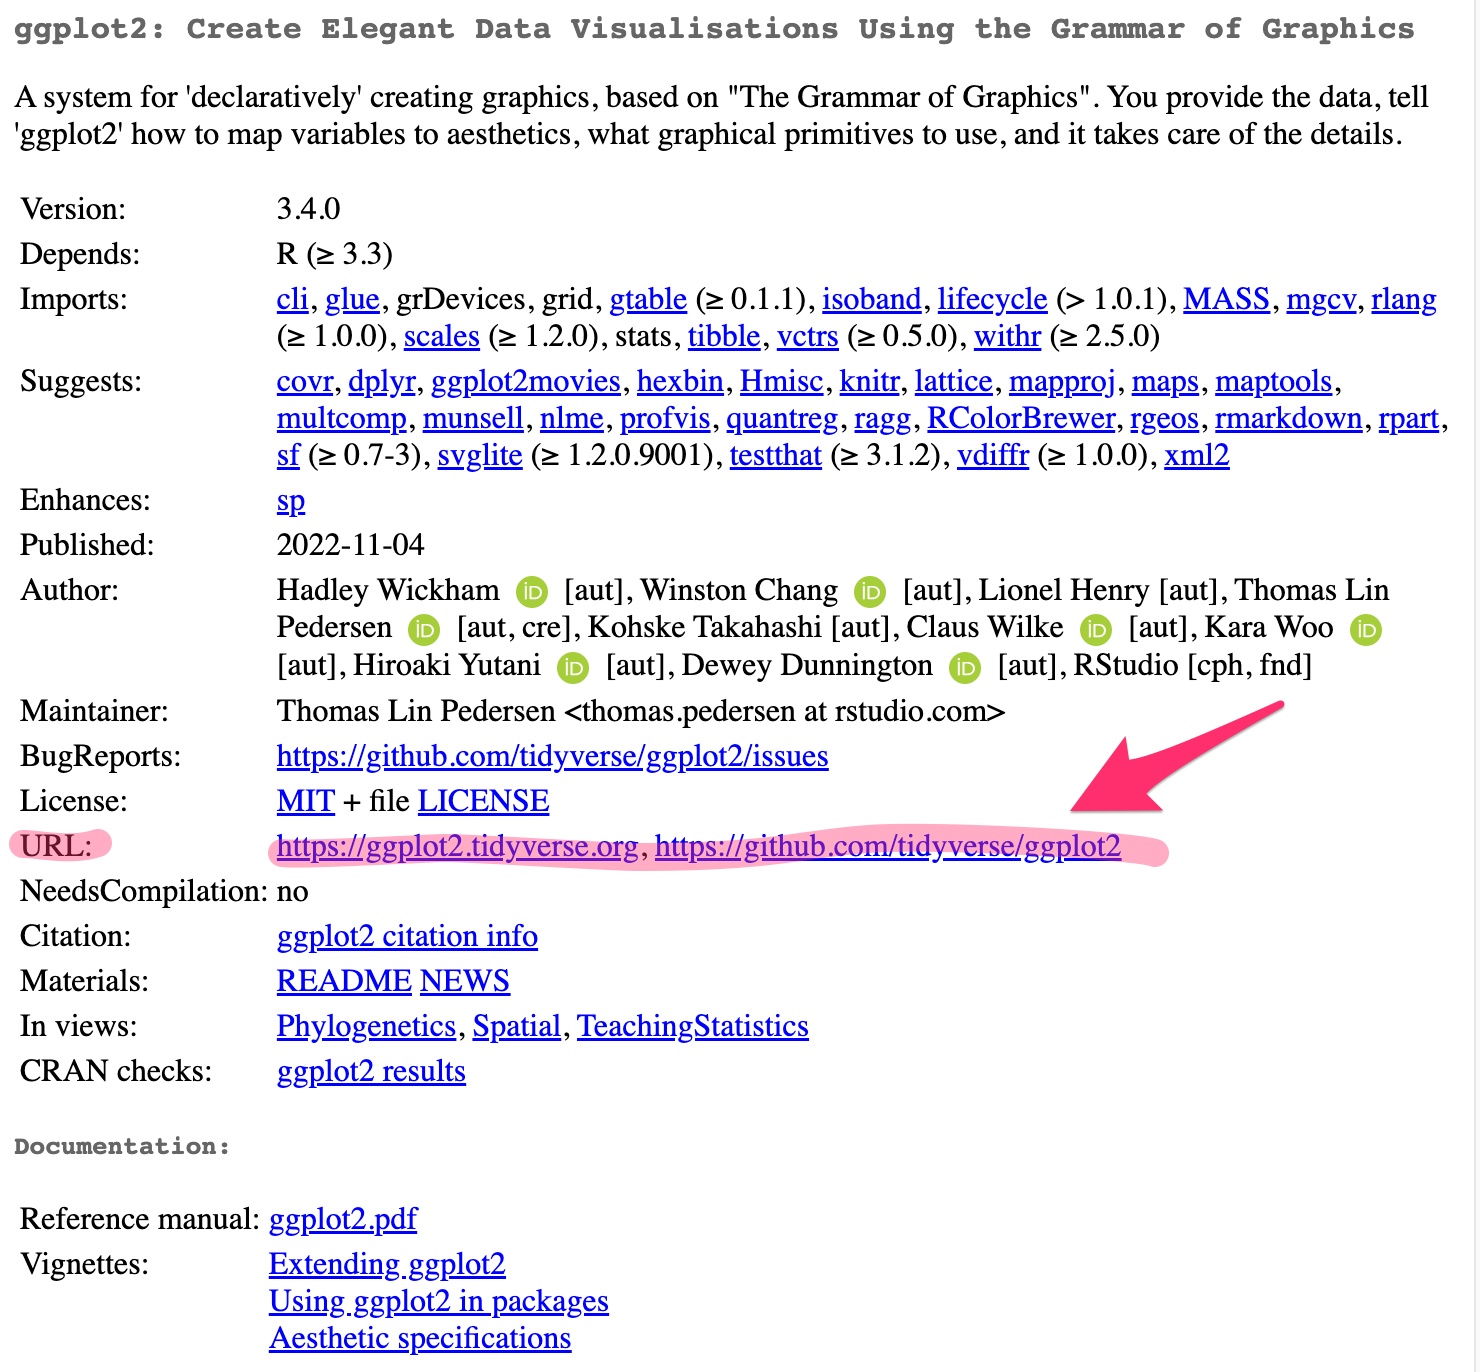 A screenshot of the ggplot2 Cran page with the url highlighted.